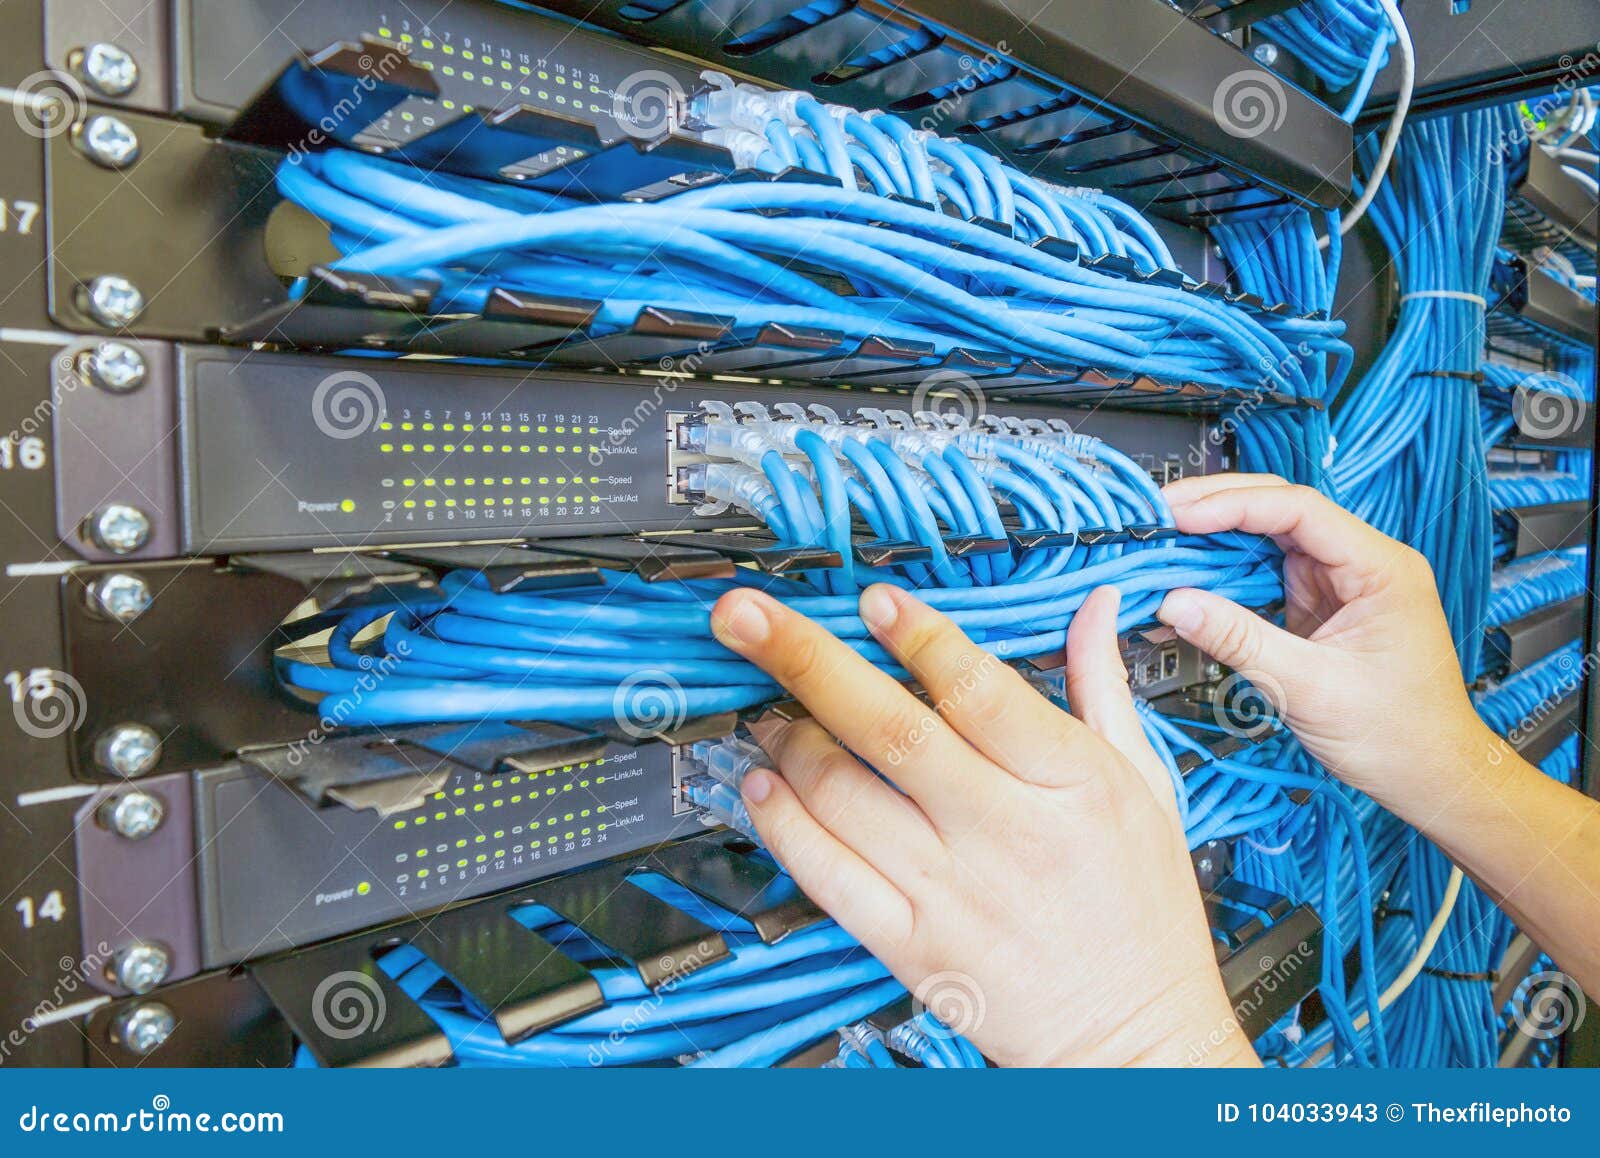 Network Switch And Ethernet Cables Stock Image Image Of Business